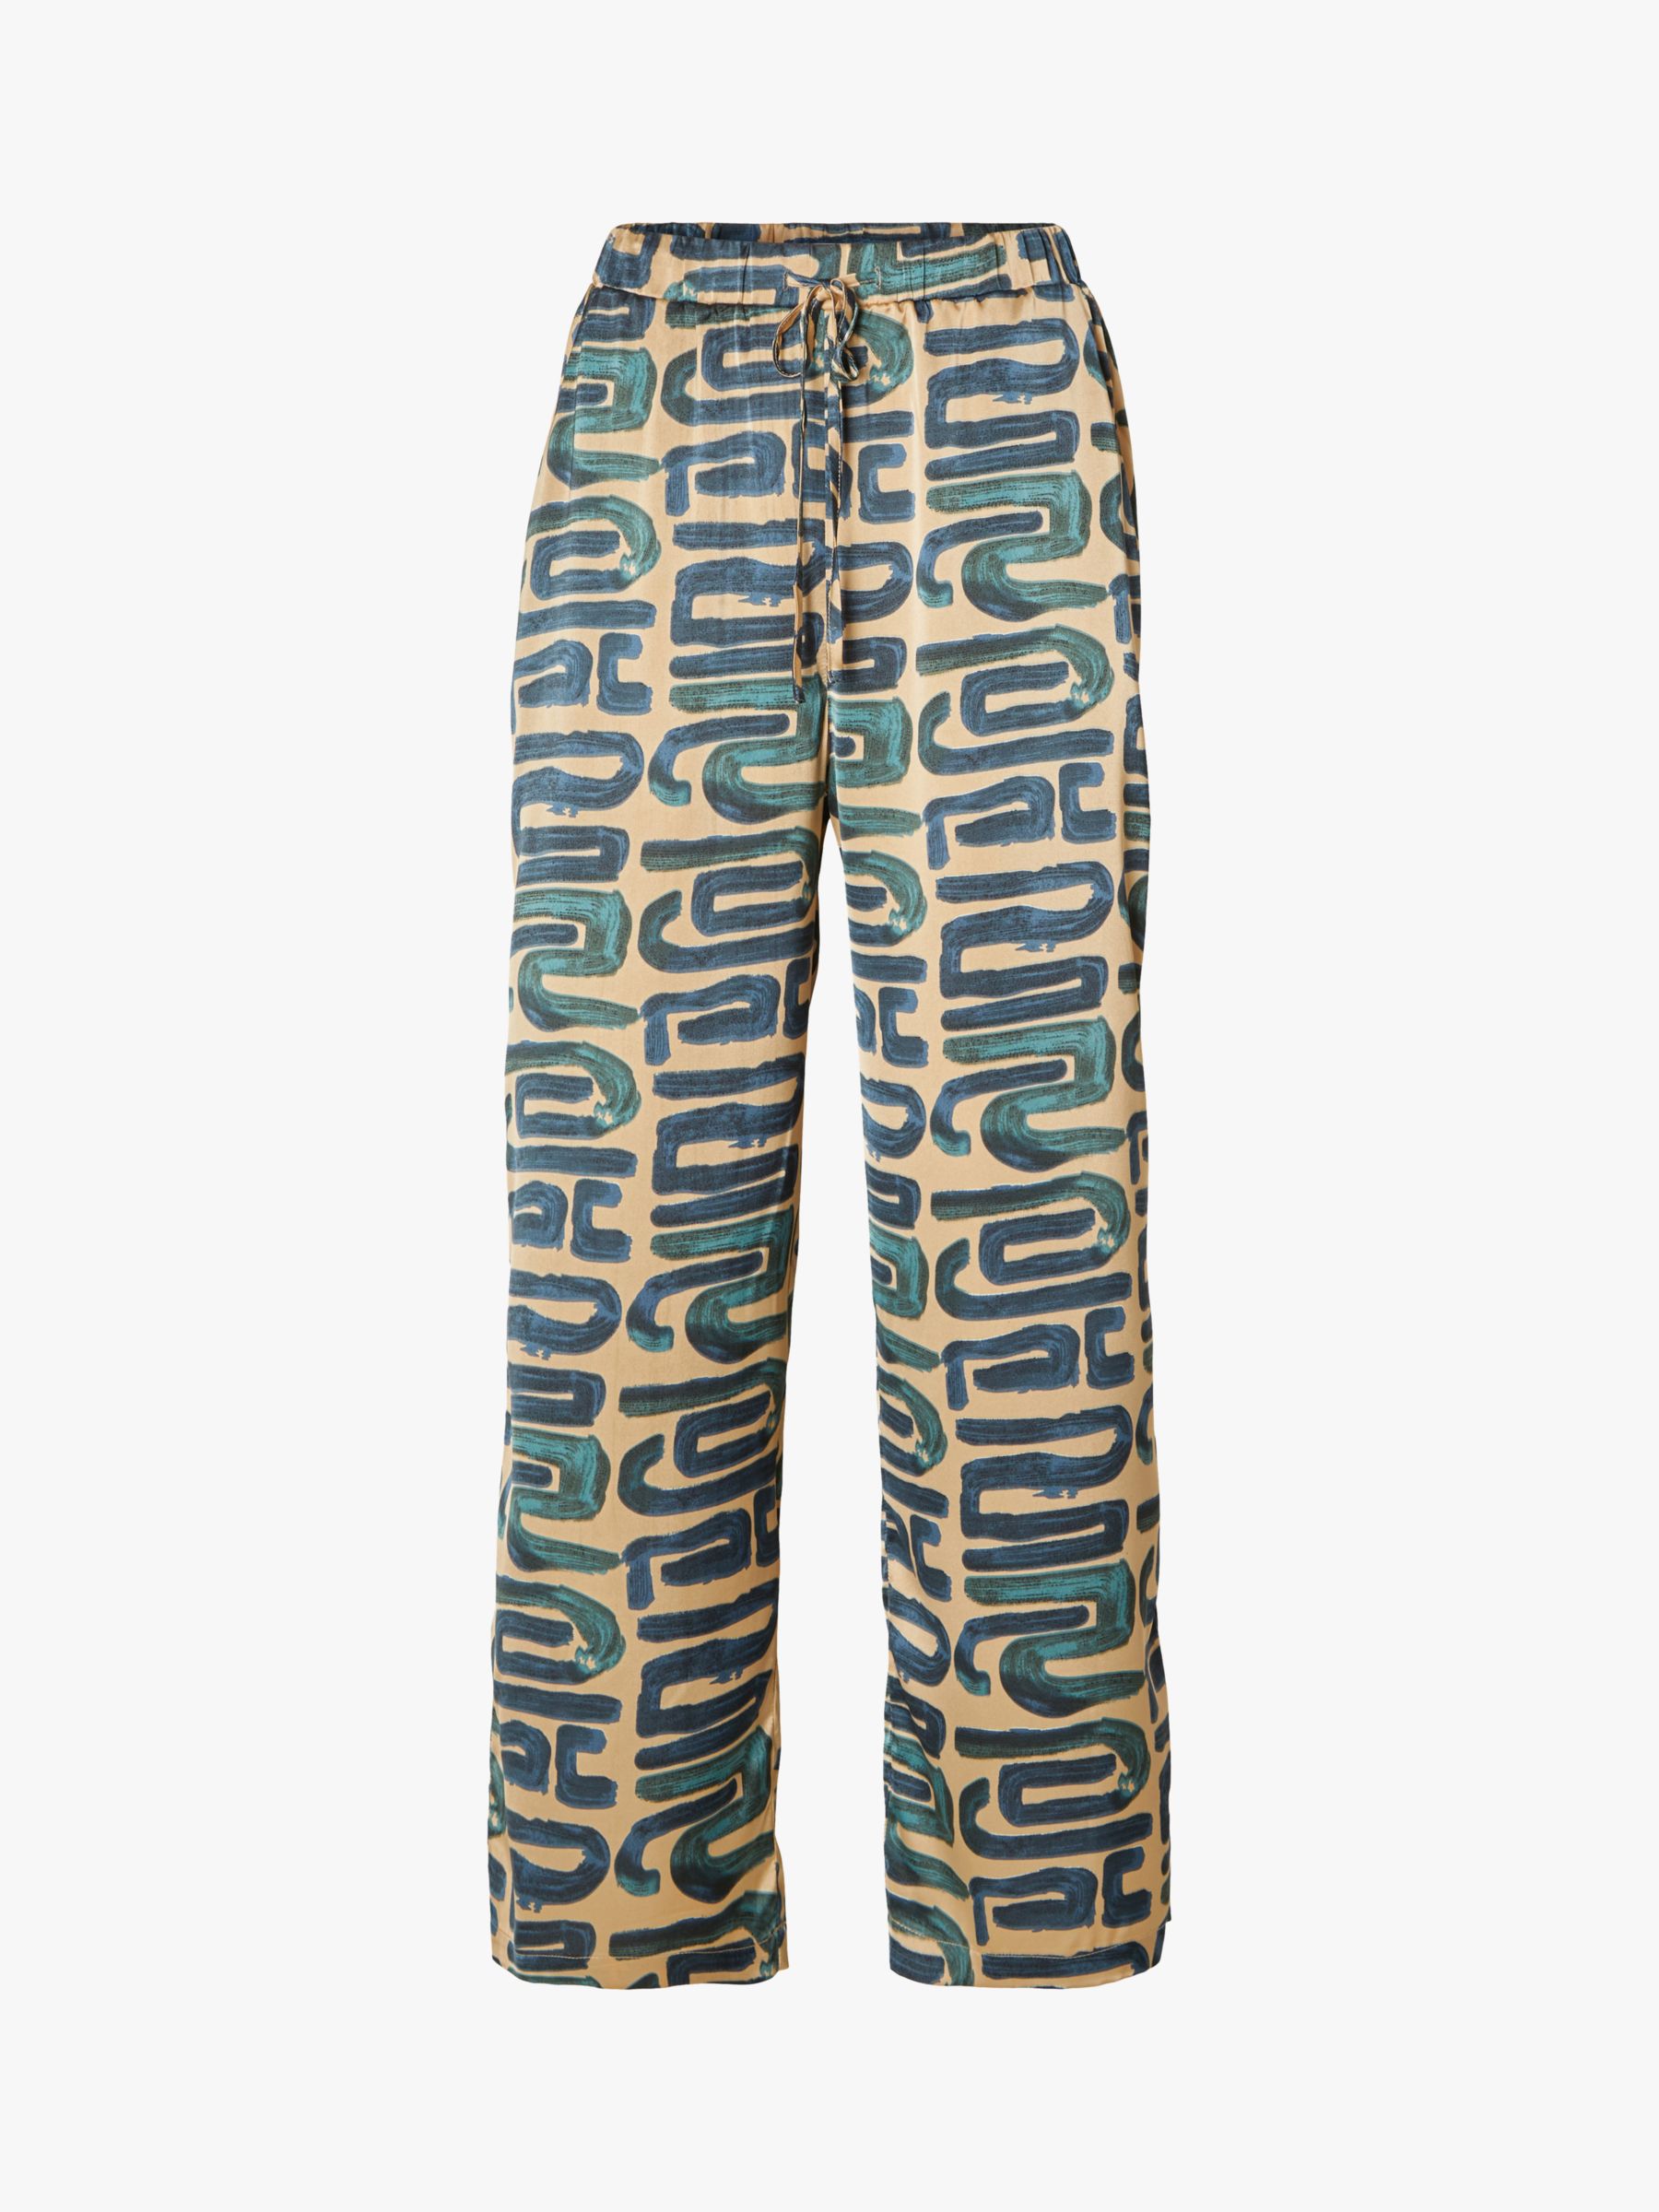 SELECTED FEMME Abstract Print Trousers, Almond Buff at John Lewis & Partners